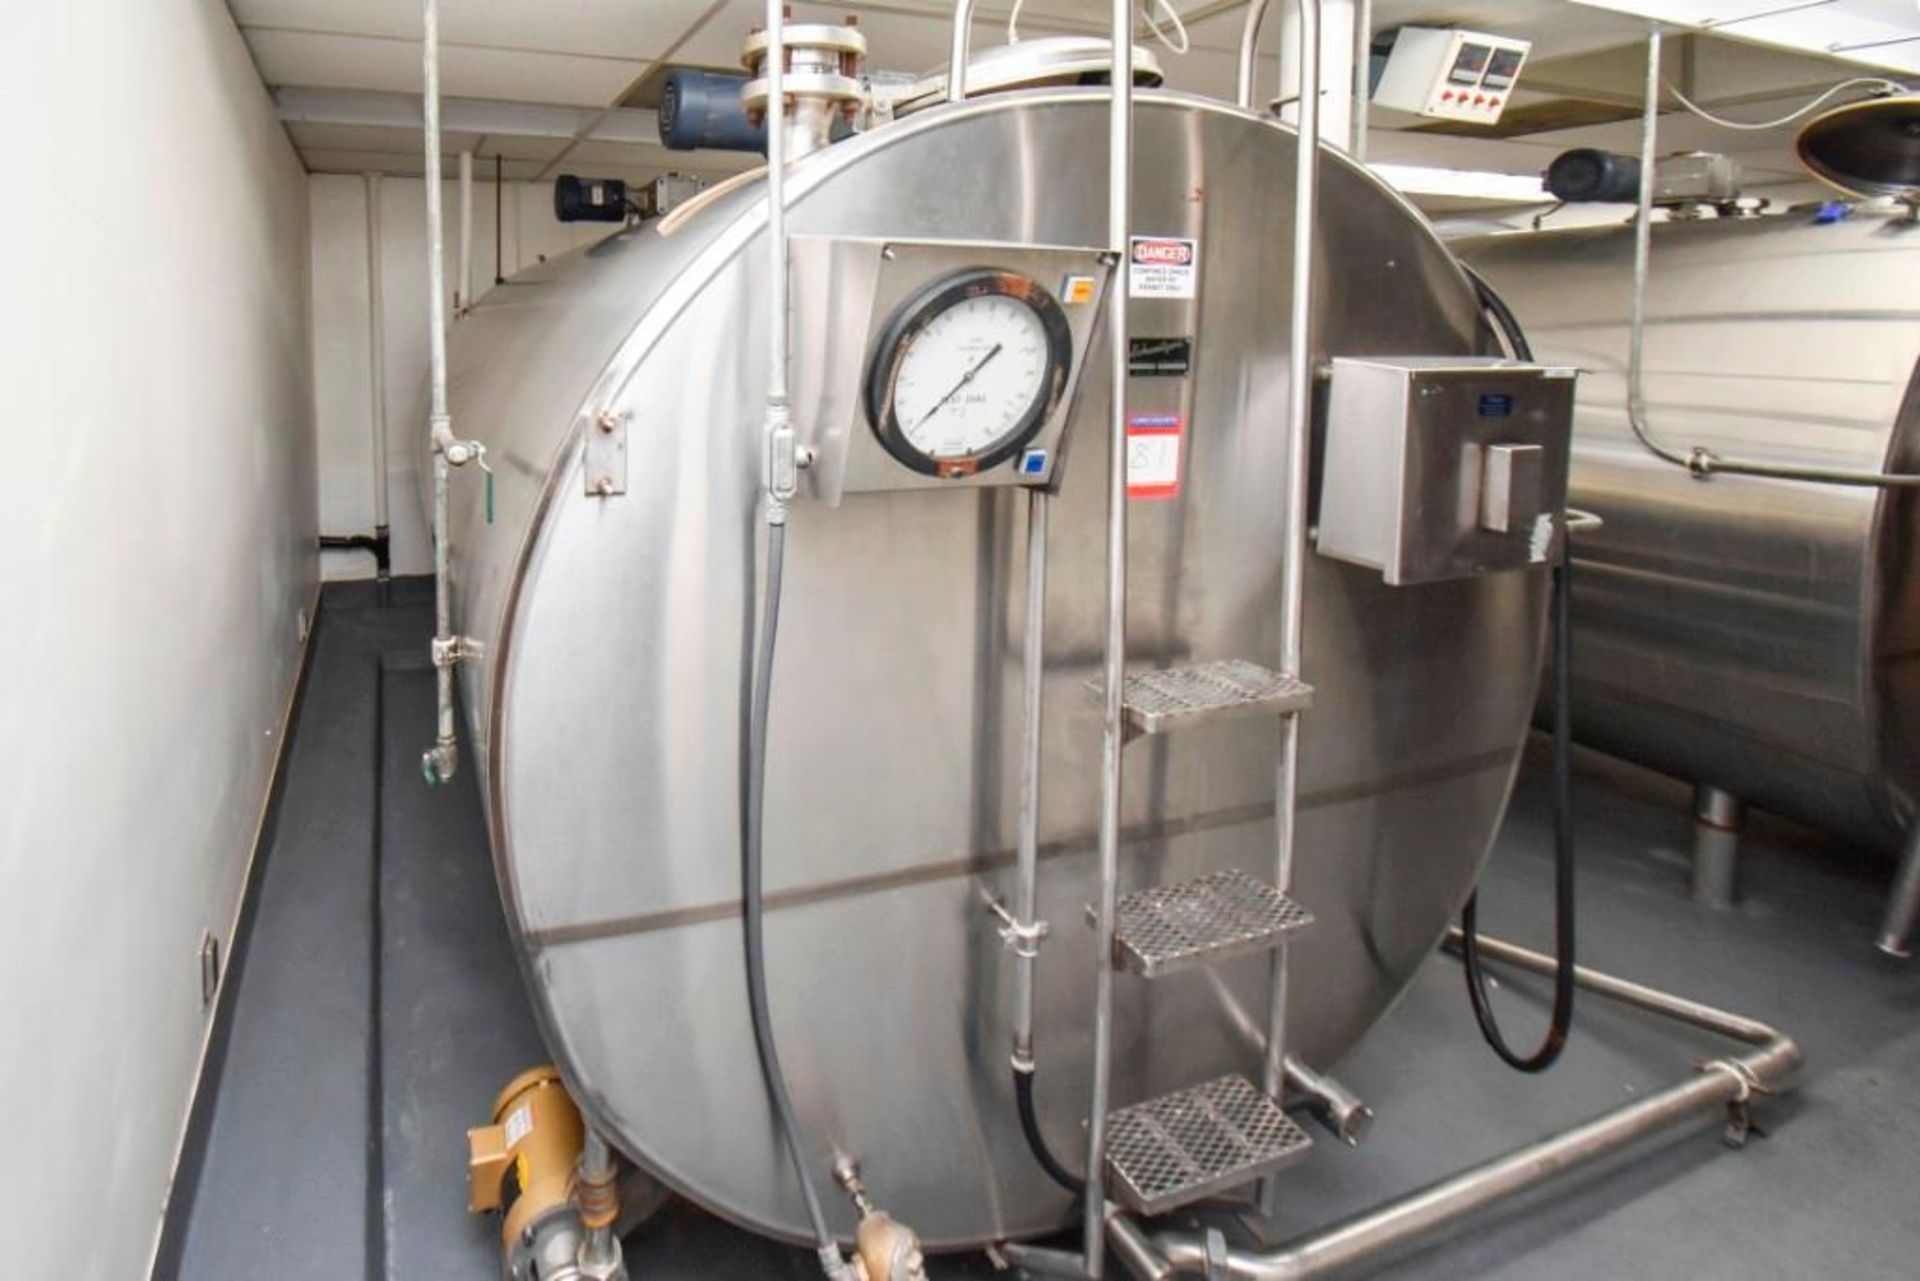 Schweitzer's 2000 Gallon Tank with Freon Cooling System - Image 3 of 5